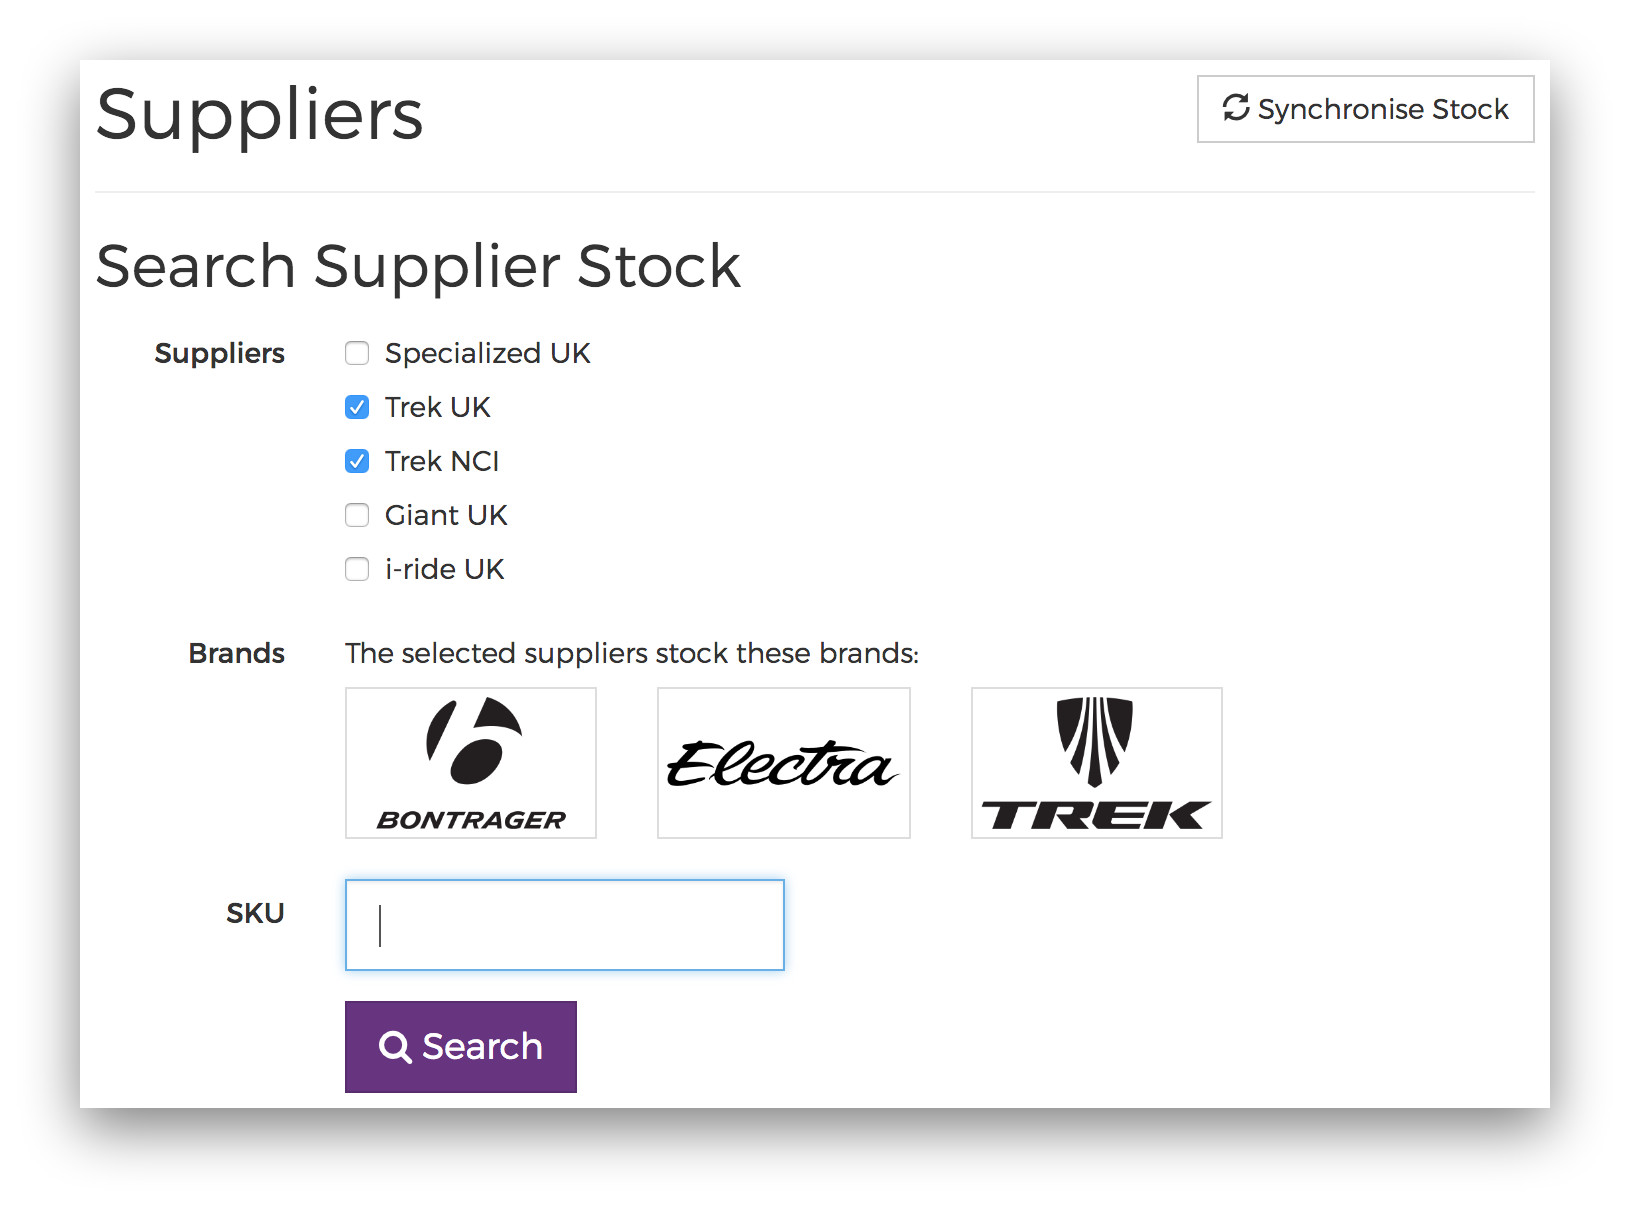 Search Supplier Stock